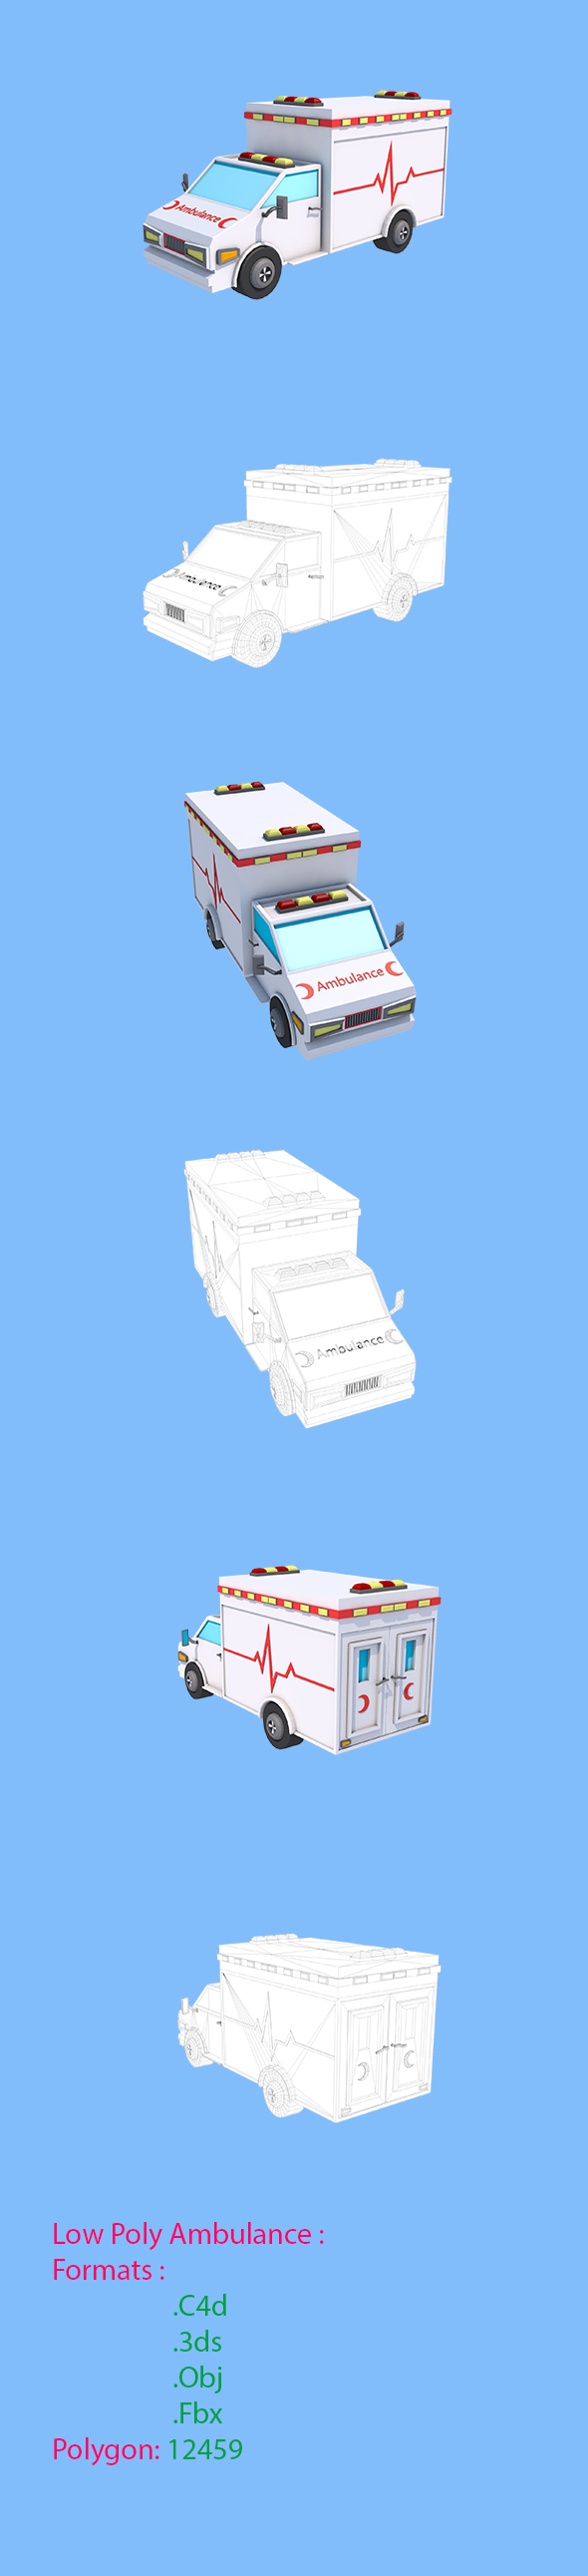 low Poly Ambulance - 3Docean 16197700